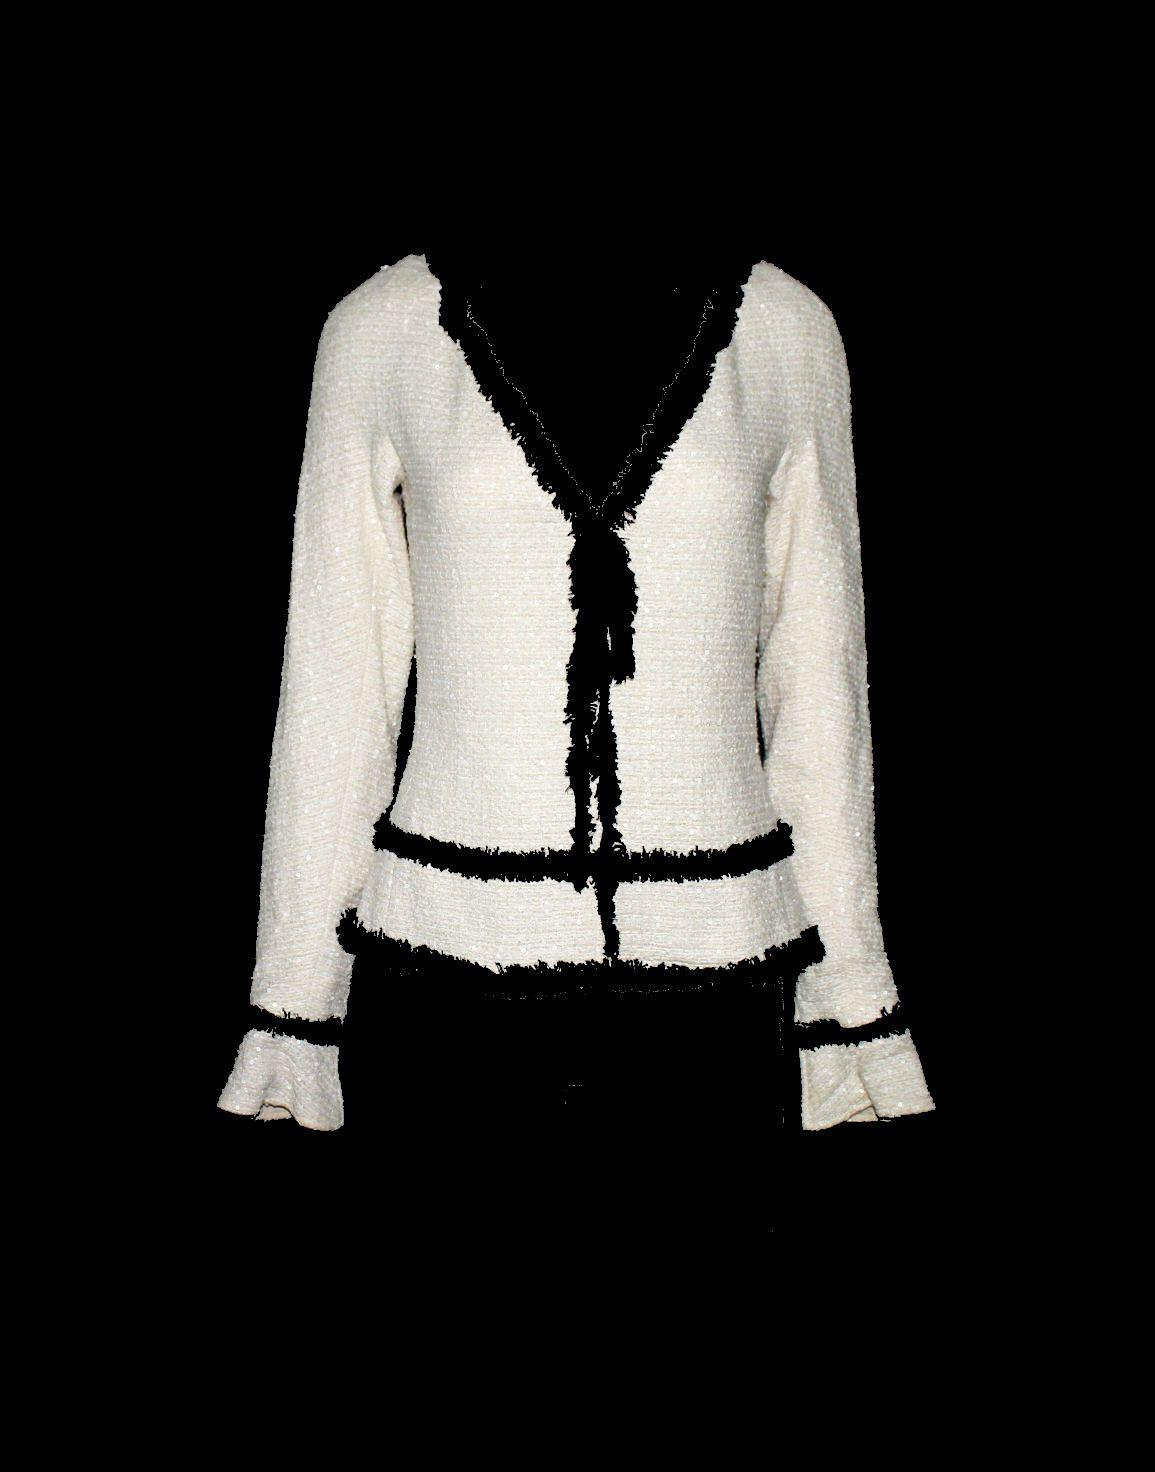 Chanel signature jacket
Classic Chanel monochrome signature style that never goes out of style
Stunning offwhite tweed produced by Maison Lesage exclusively for Chanel
Black fringed tweed trimming
Bow-tie detail in front
Shiny small sequins all